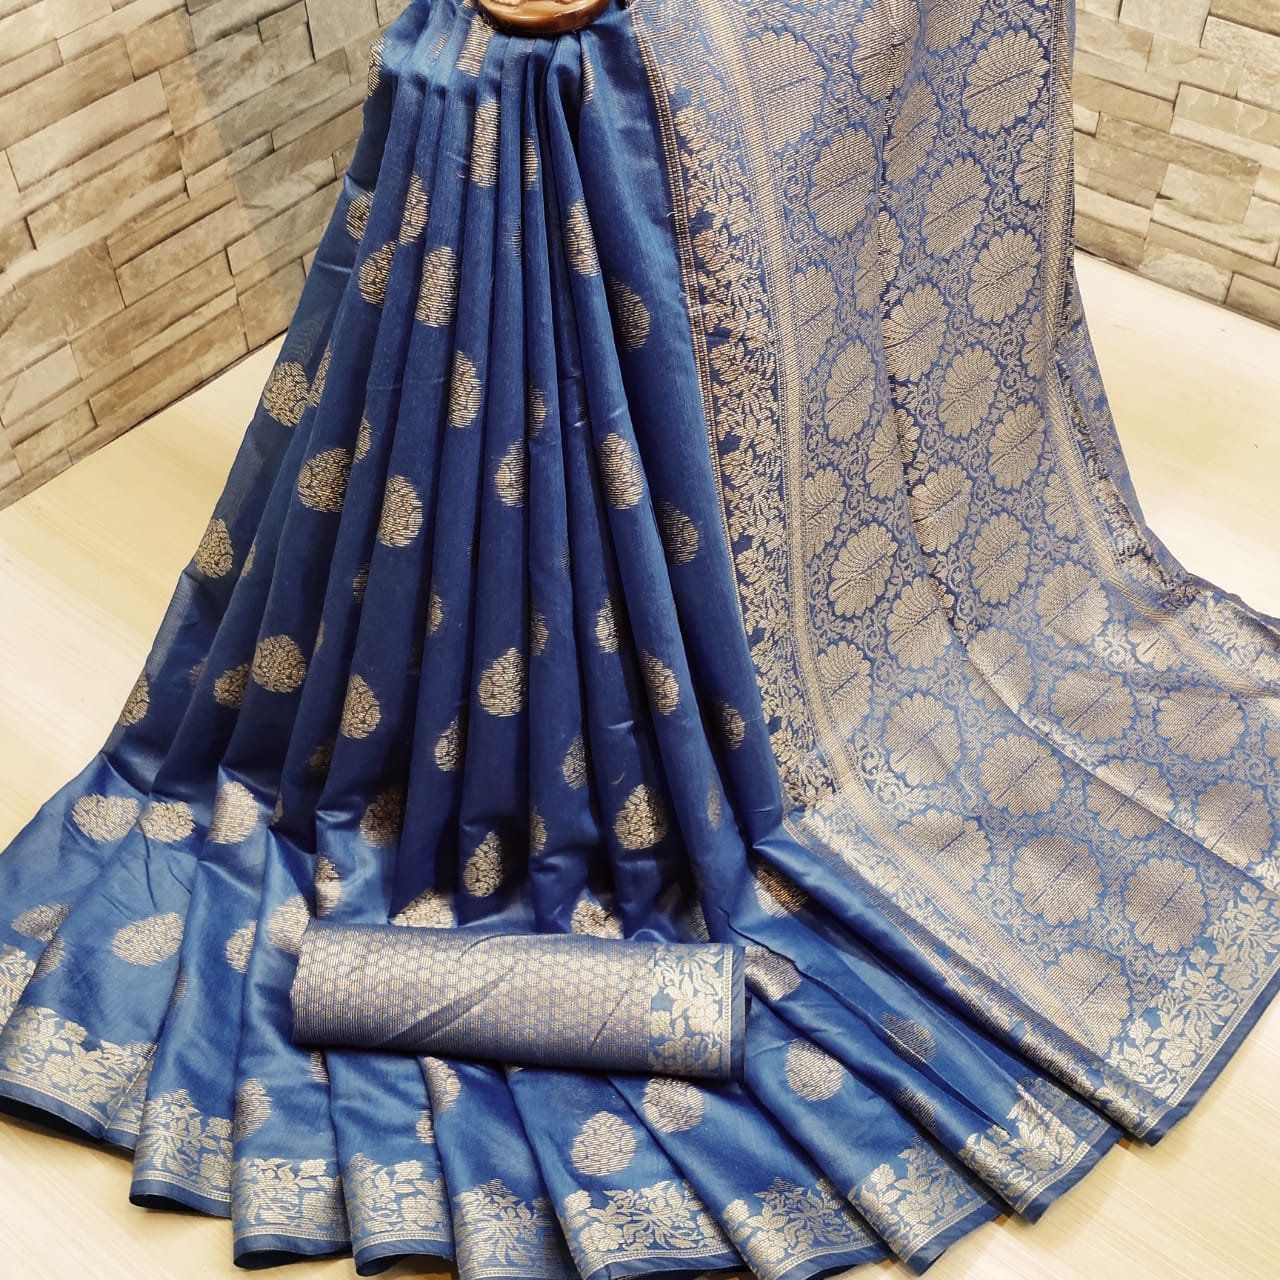 Blue color soft cotton jequared weaving butta saree for women | Etsy - Blue color soft cotton jequared weaving butta saree for women | Etsy -   19 style Women indian ideas